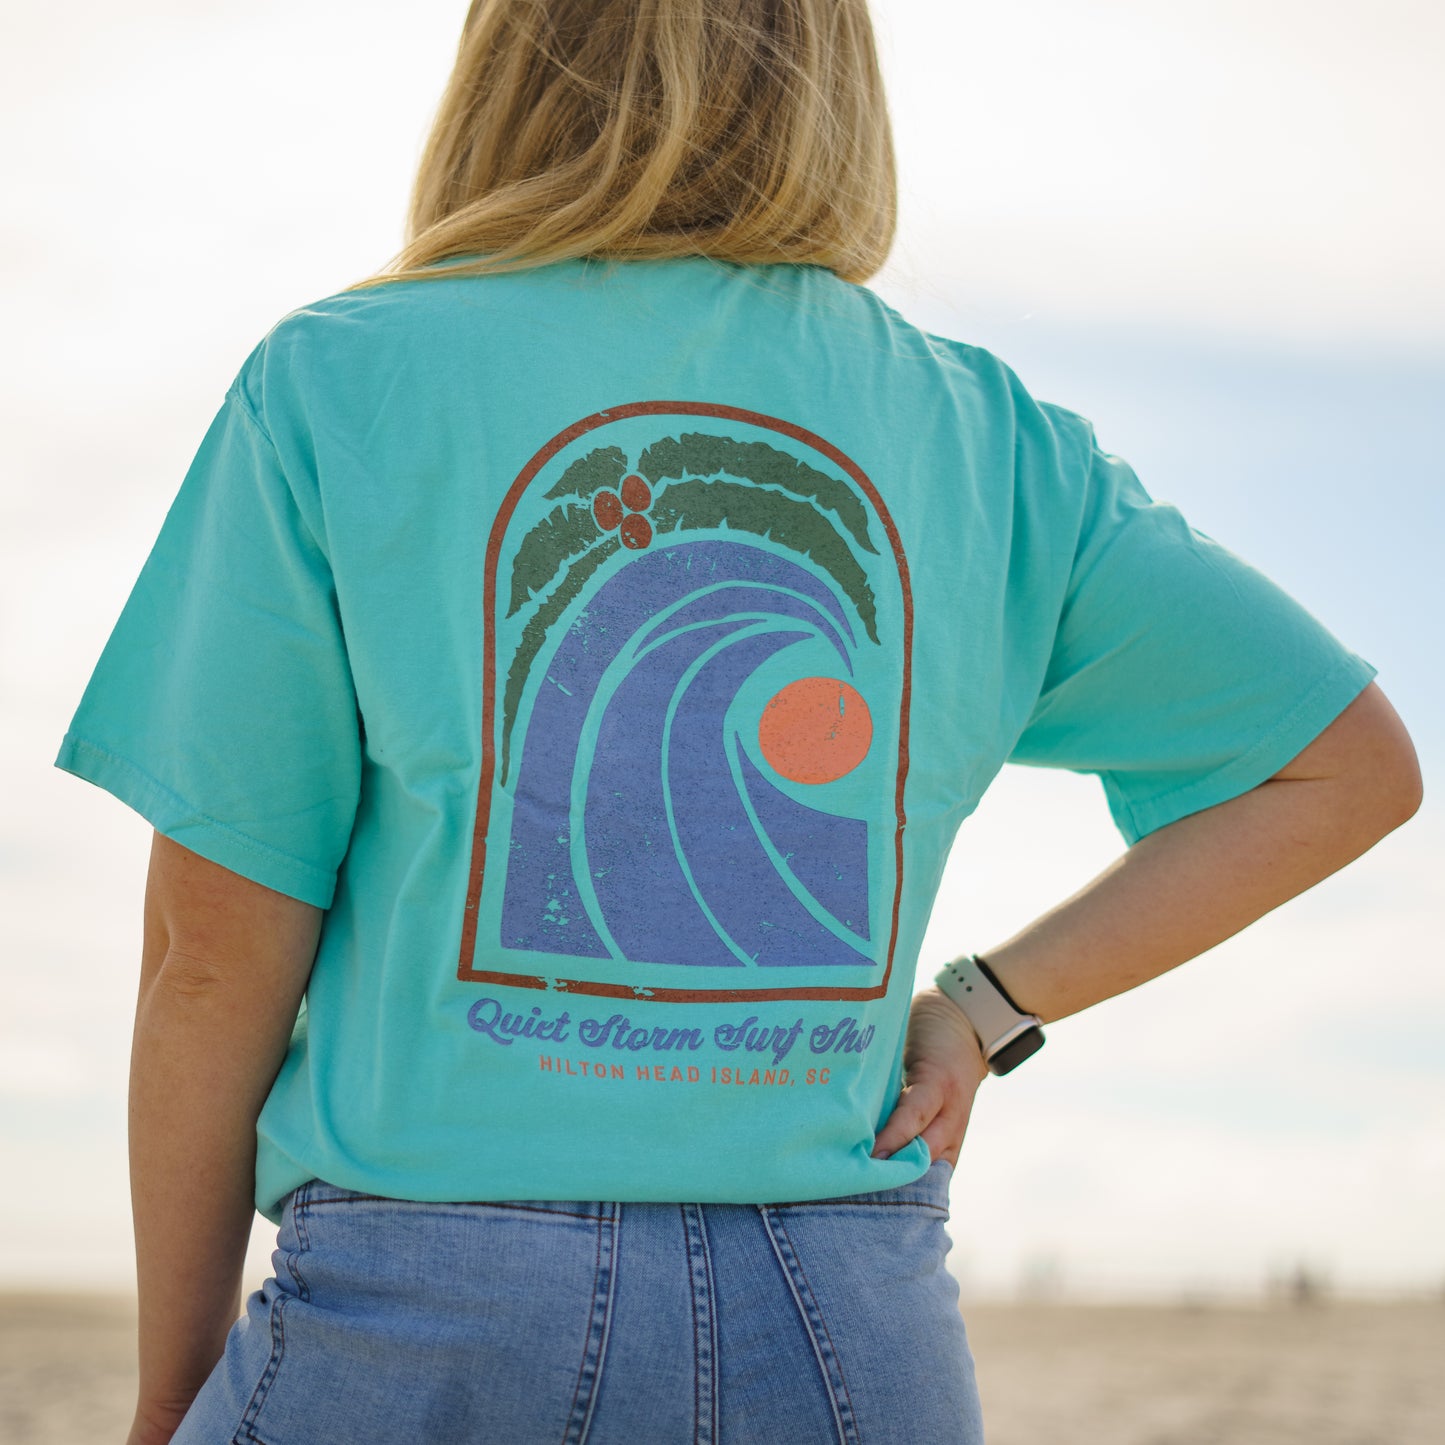 Women wearing teal T-shirt with design that has a palm tree with a wave and a moon with Quiet Storm Surf Shop Hilton Head Island, SC